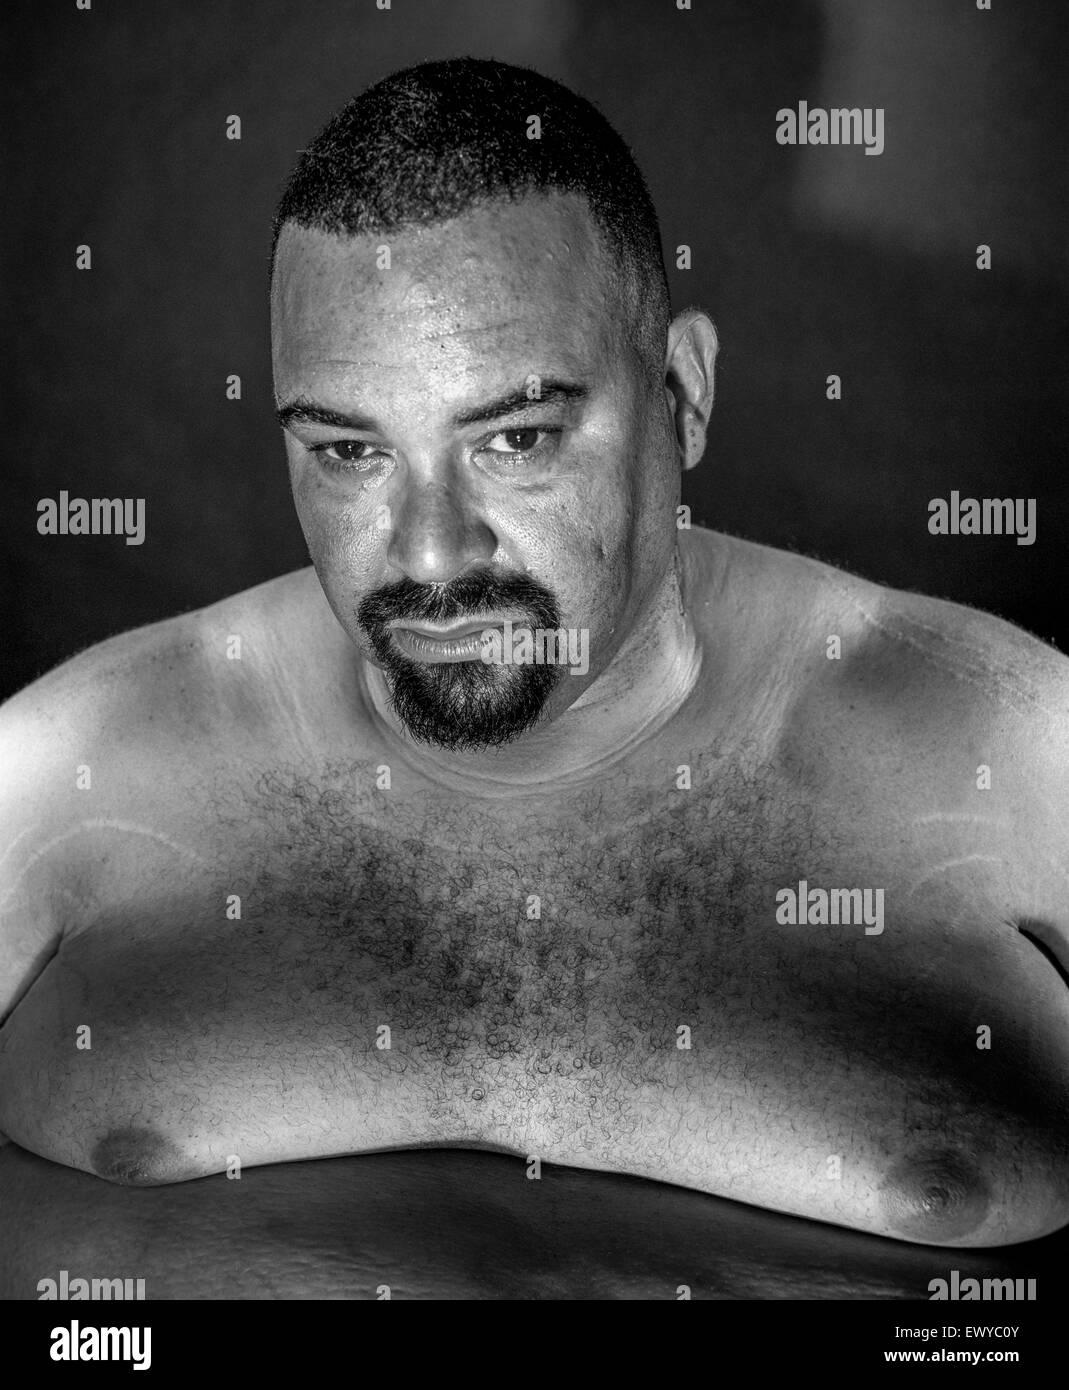 Wrestling quirky Black and White Stock Photos & Images - Alamy